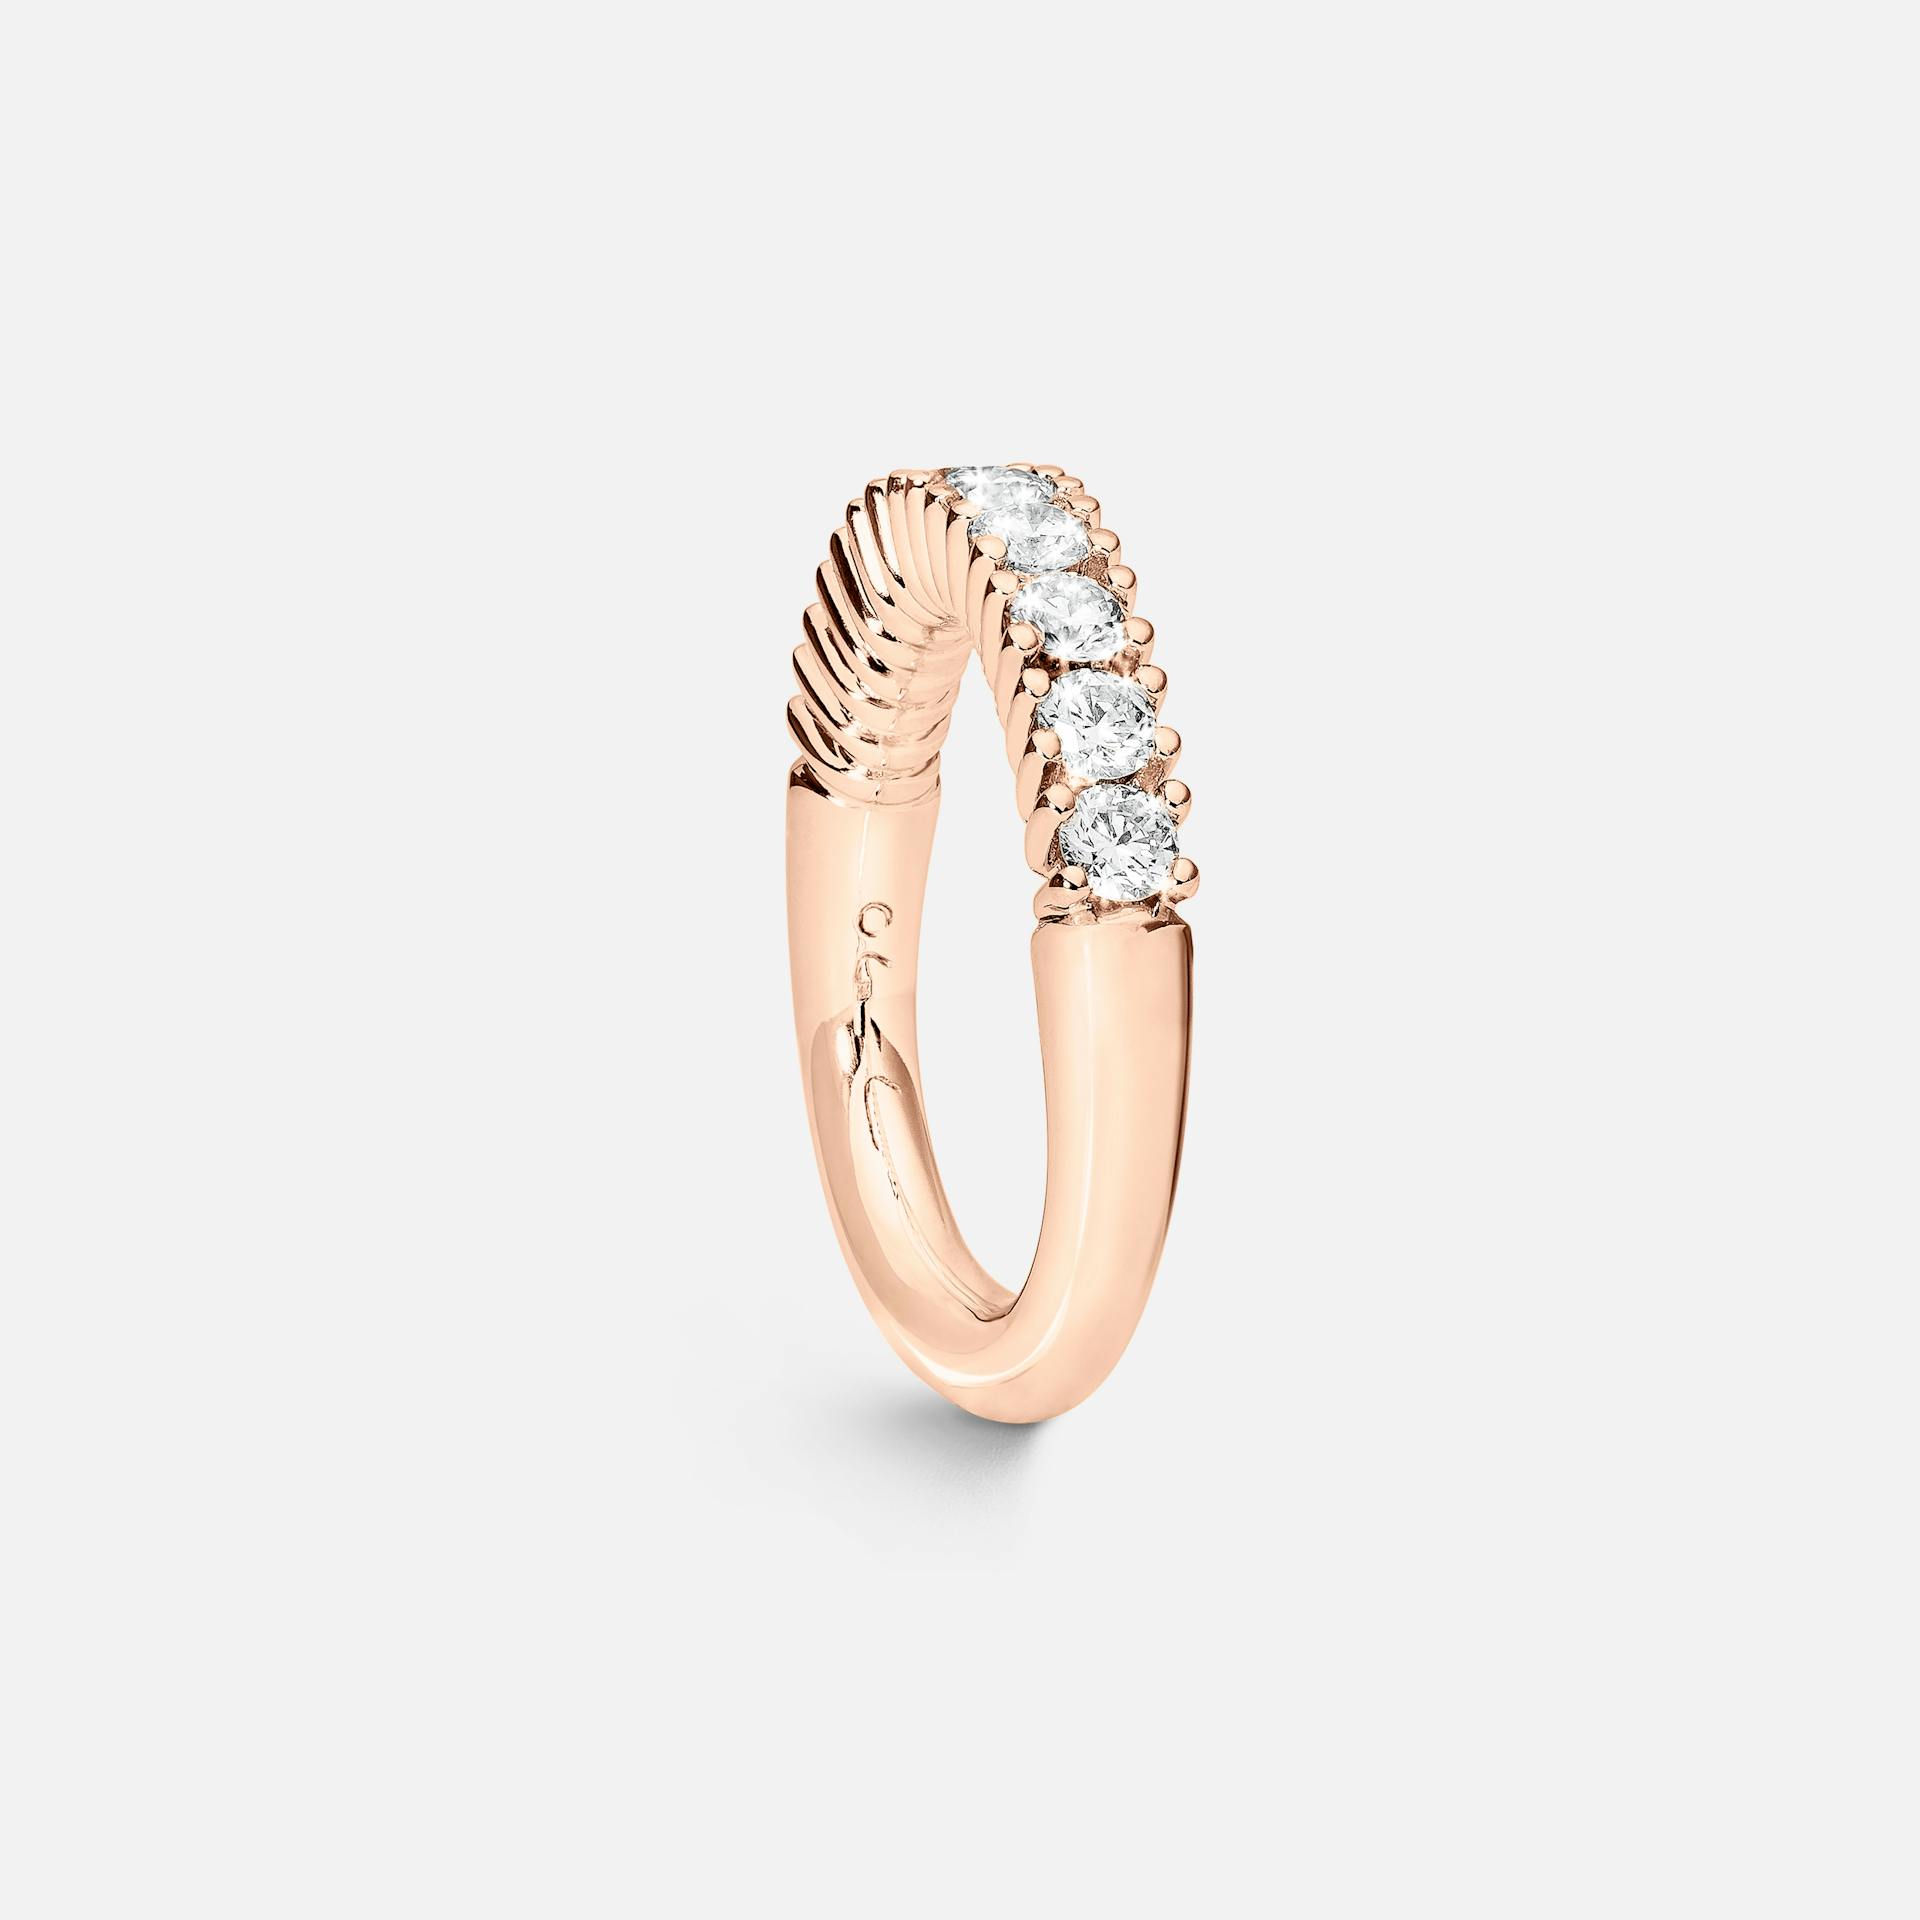 Celebration Alliance Ring in Polished Rose Gold with Diamonds  |  Ole Lynggaard Copenhagen 